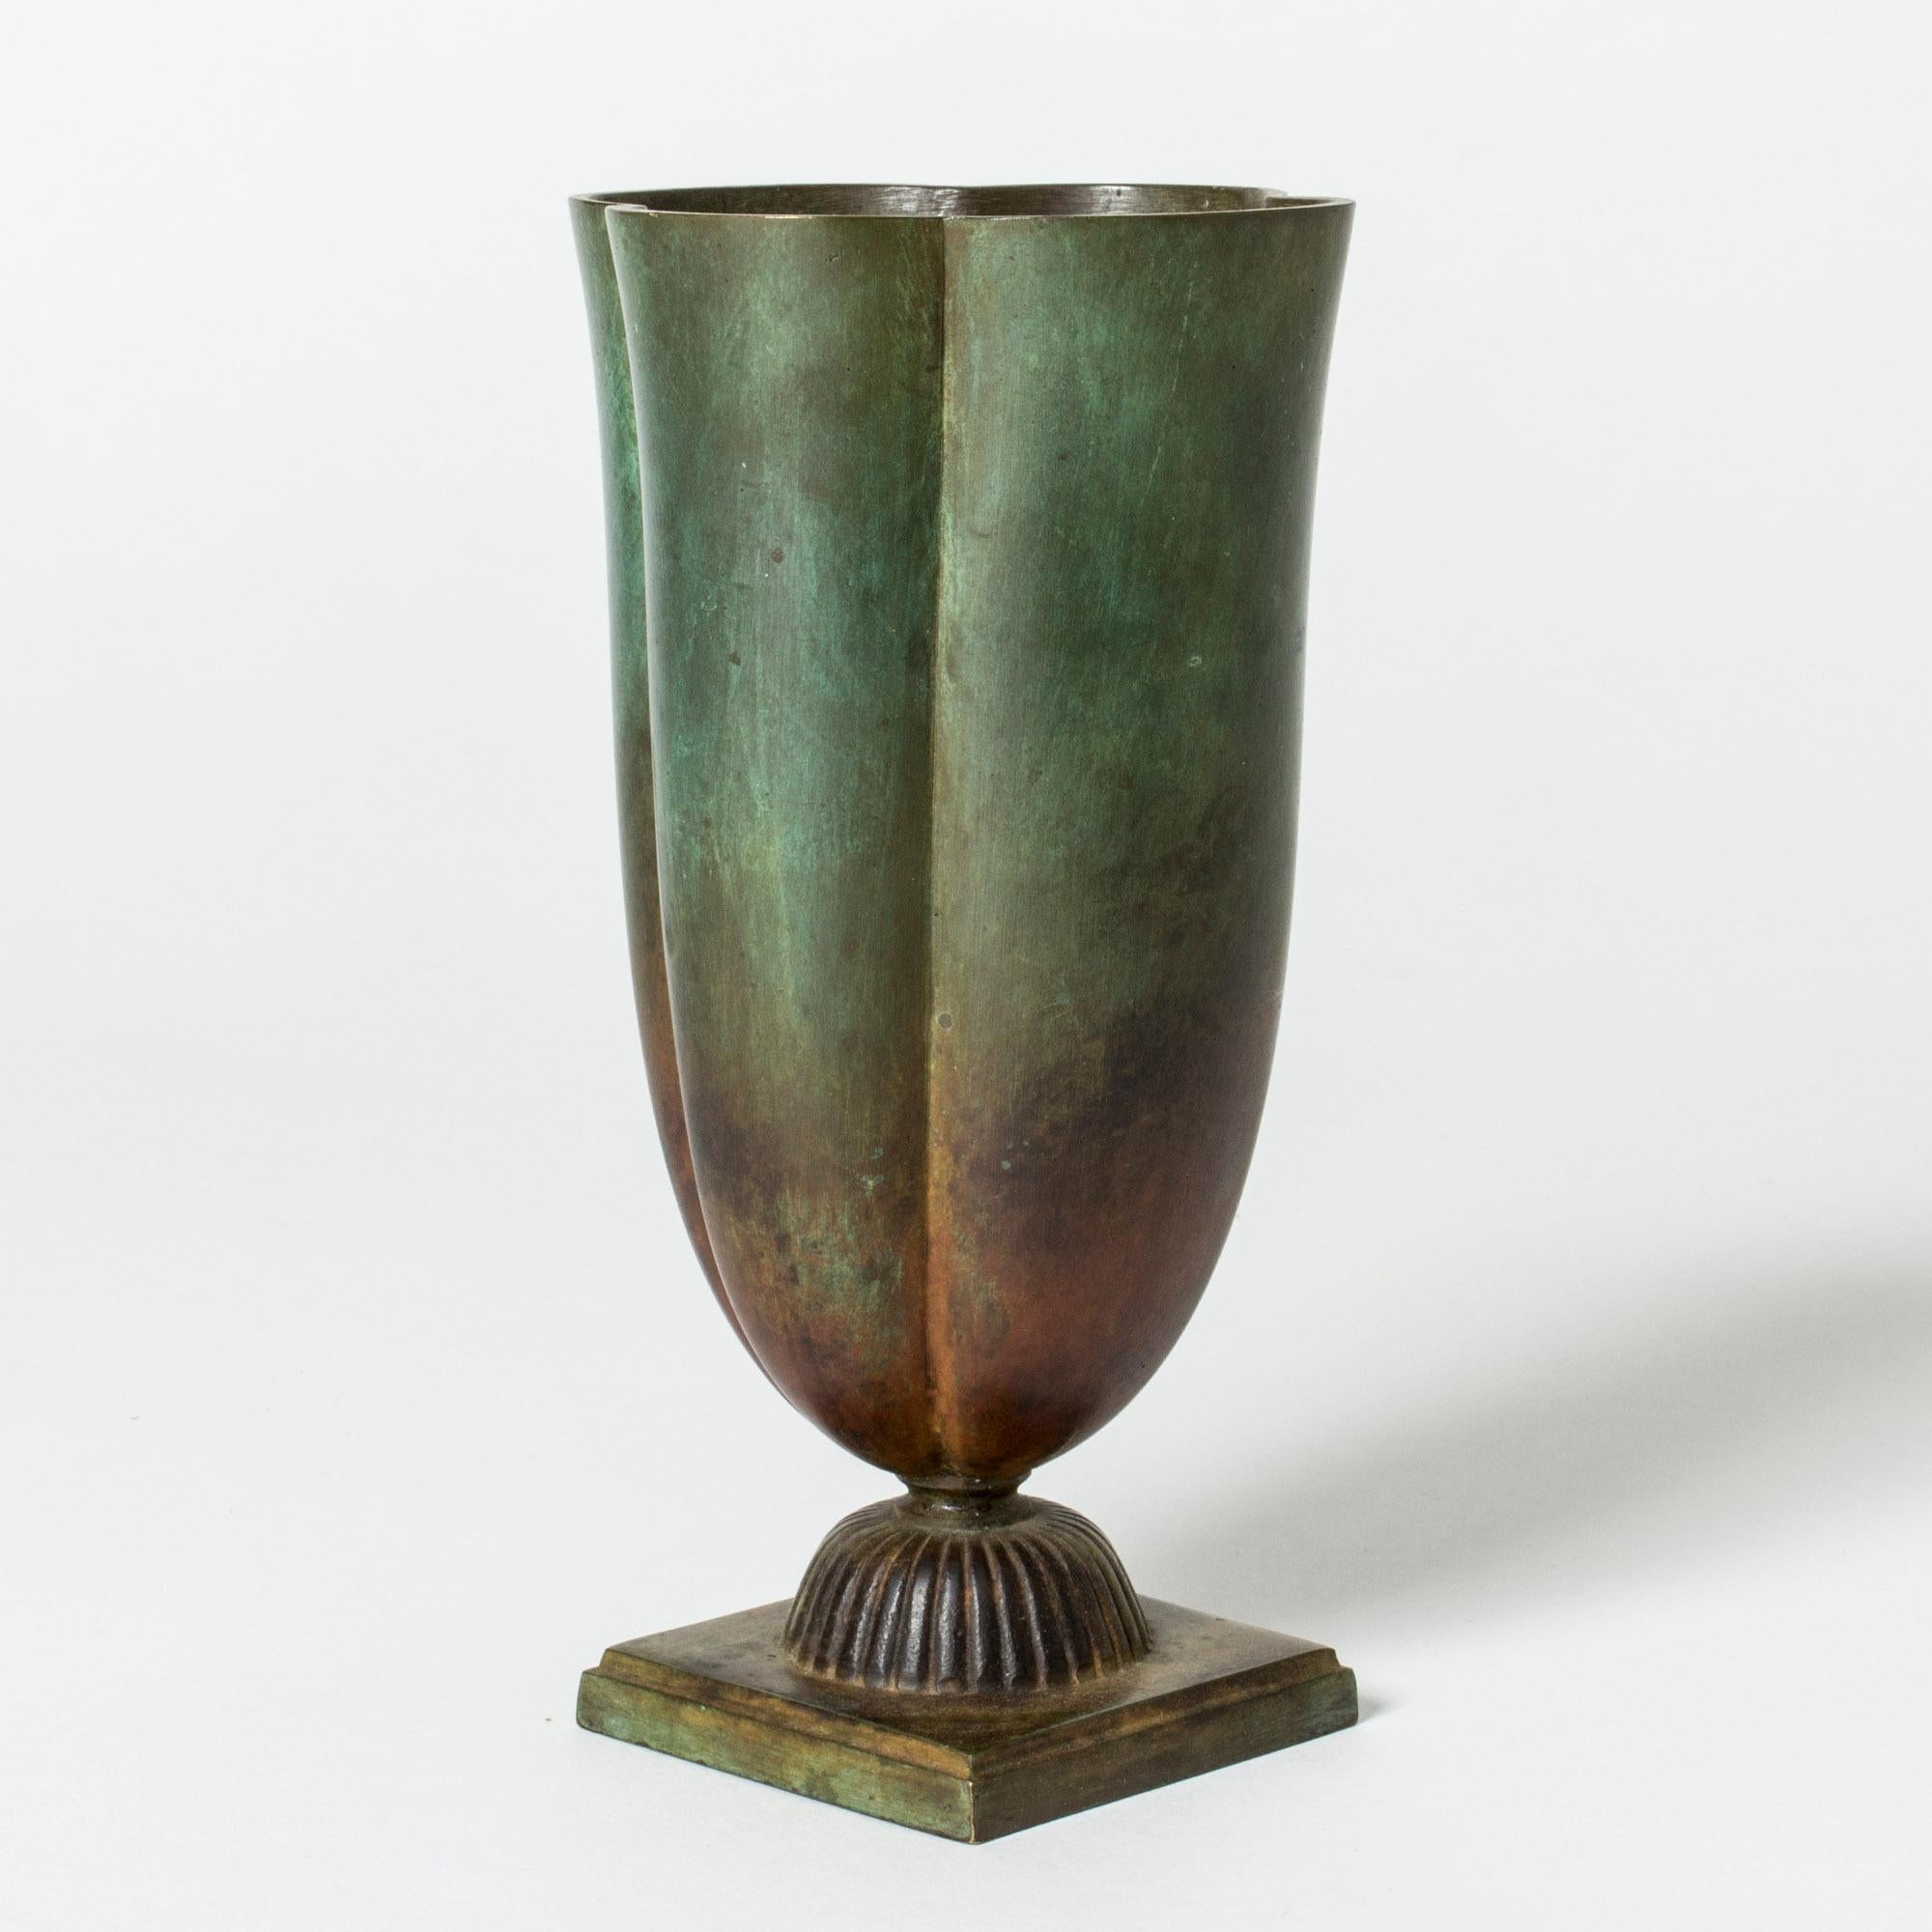 Beautiful 1930s bronze vase, hand cast at Guldsmedsaktiebolaget, GAB, and finished with a beautiful shifting moss green patina.

GAB was founded in Stockholm in 1867 and was an important influence on the Swedish art and crafts and industrial